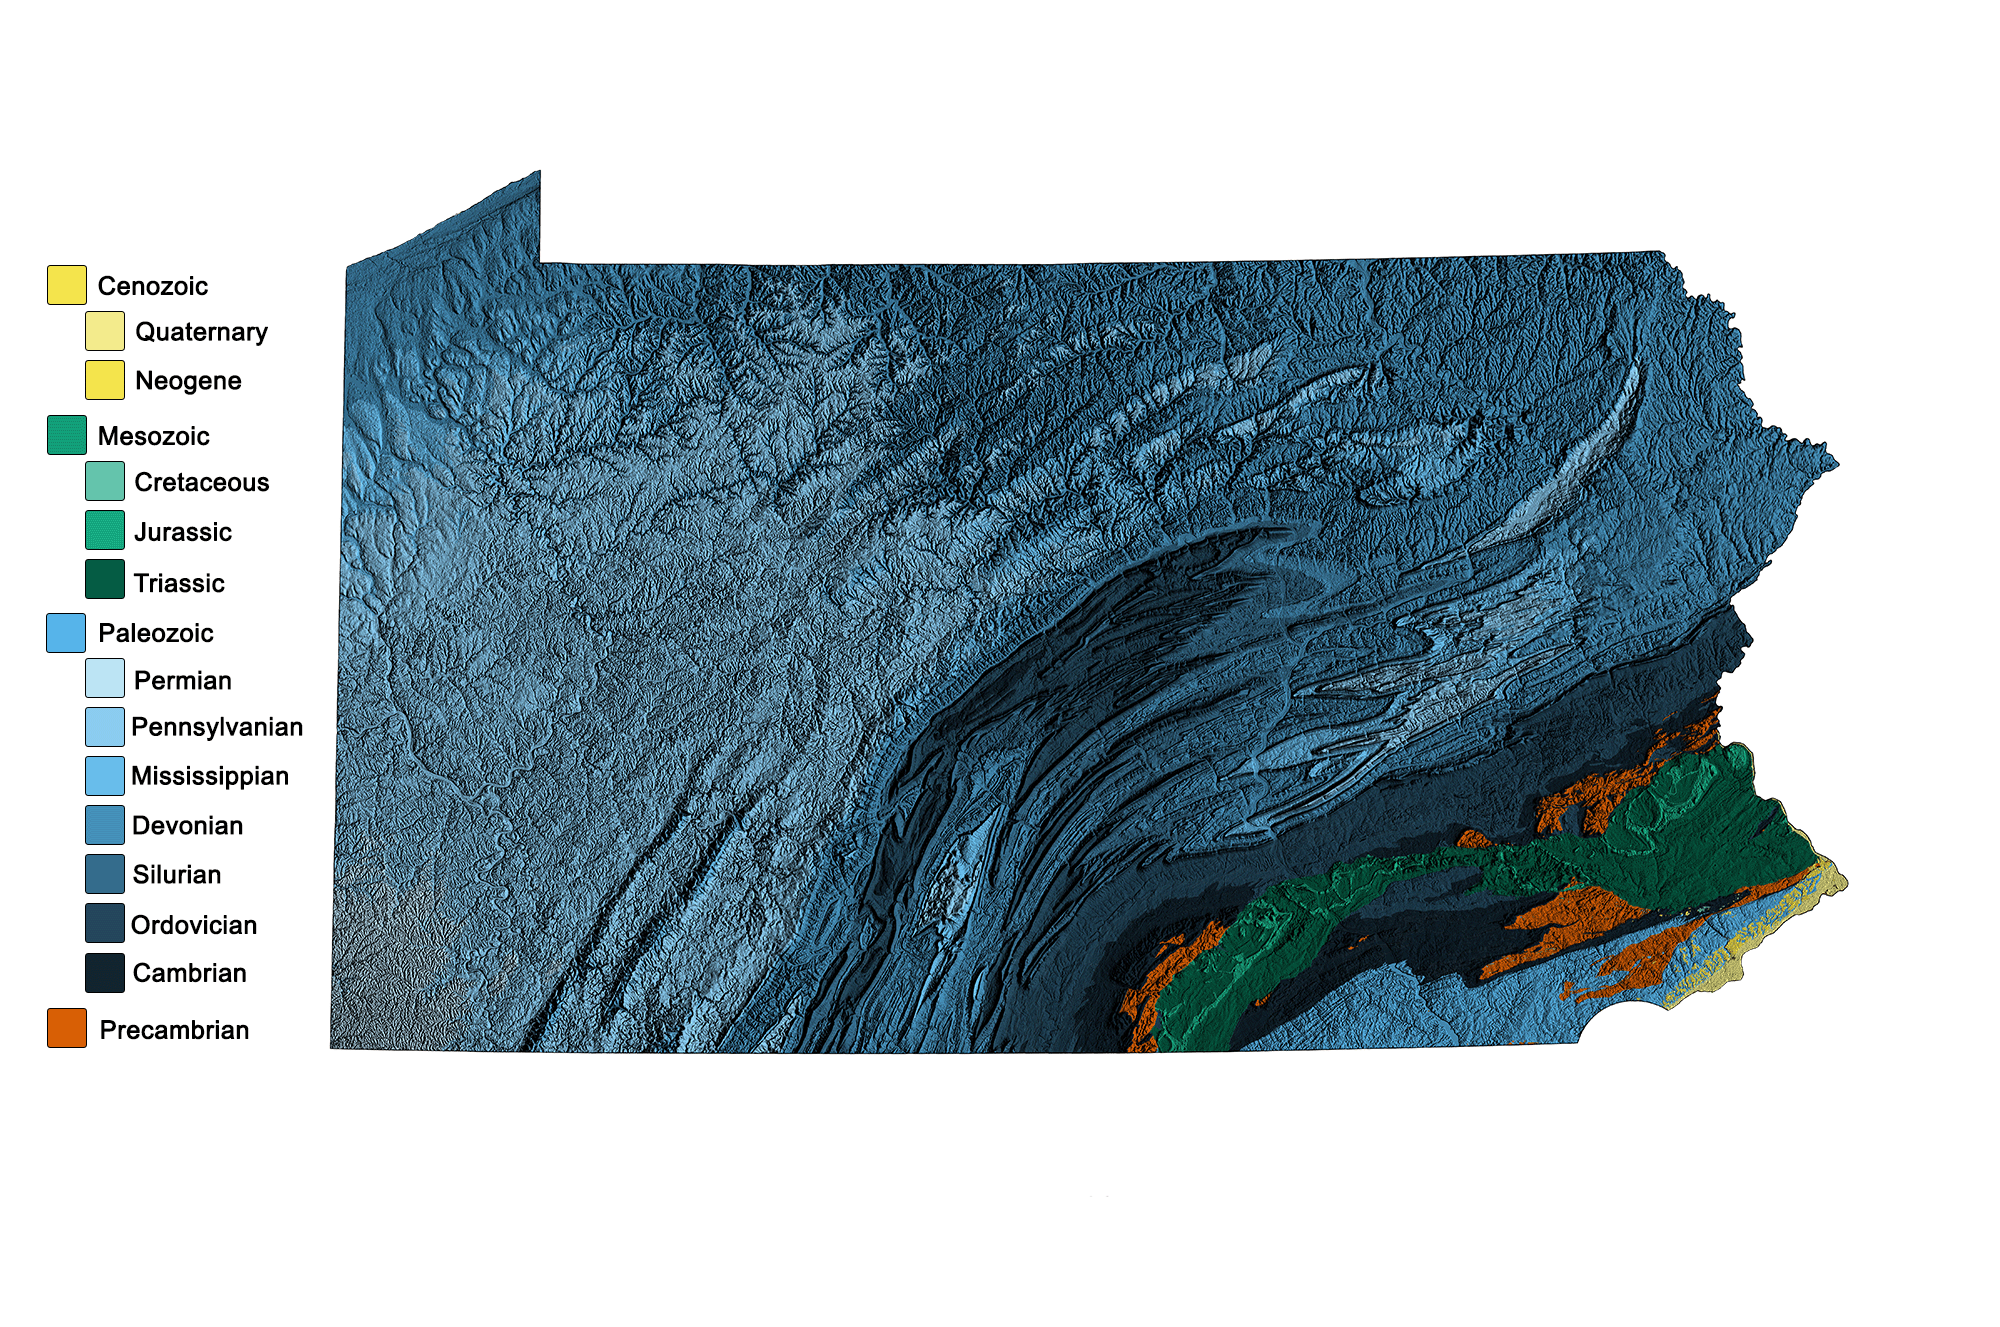 Combined geologic and topographic map of Pennsylvania.